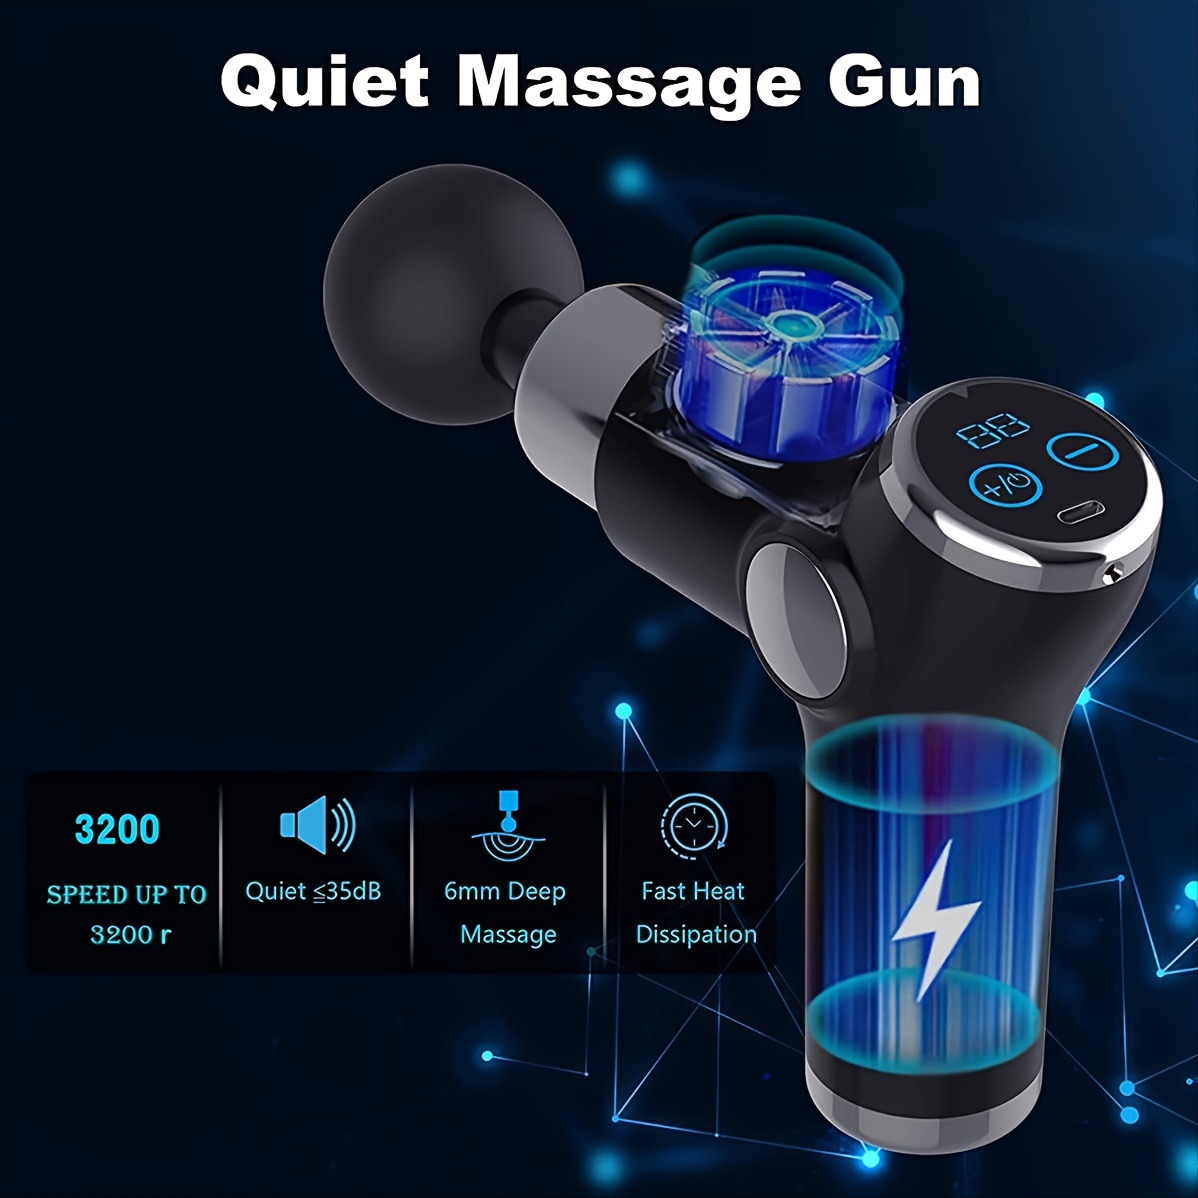 32 Gear Lcd Mini Fascia Gun Usb Fitness Muscle Relaxer Massage Gun,  Suitable For Neck, Whole Body Relaxation